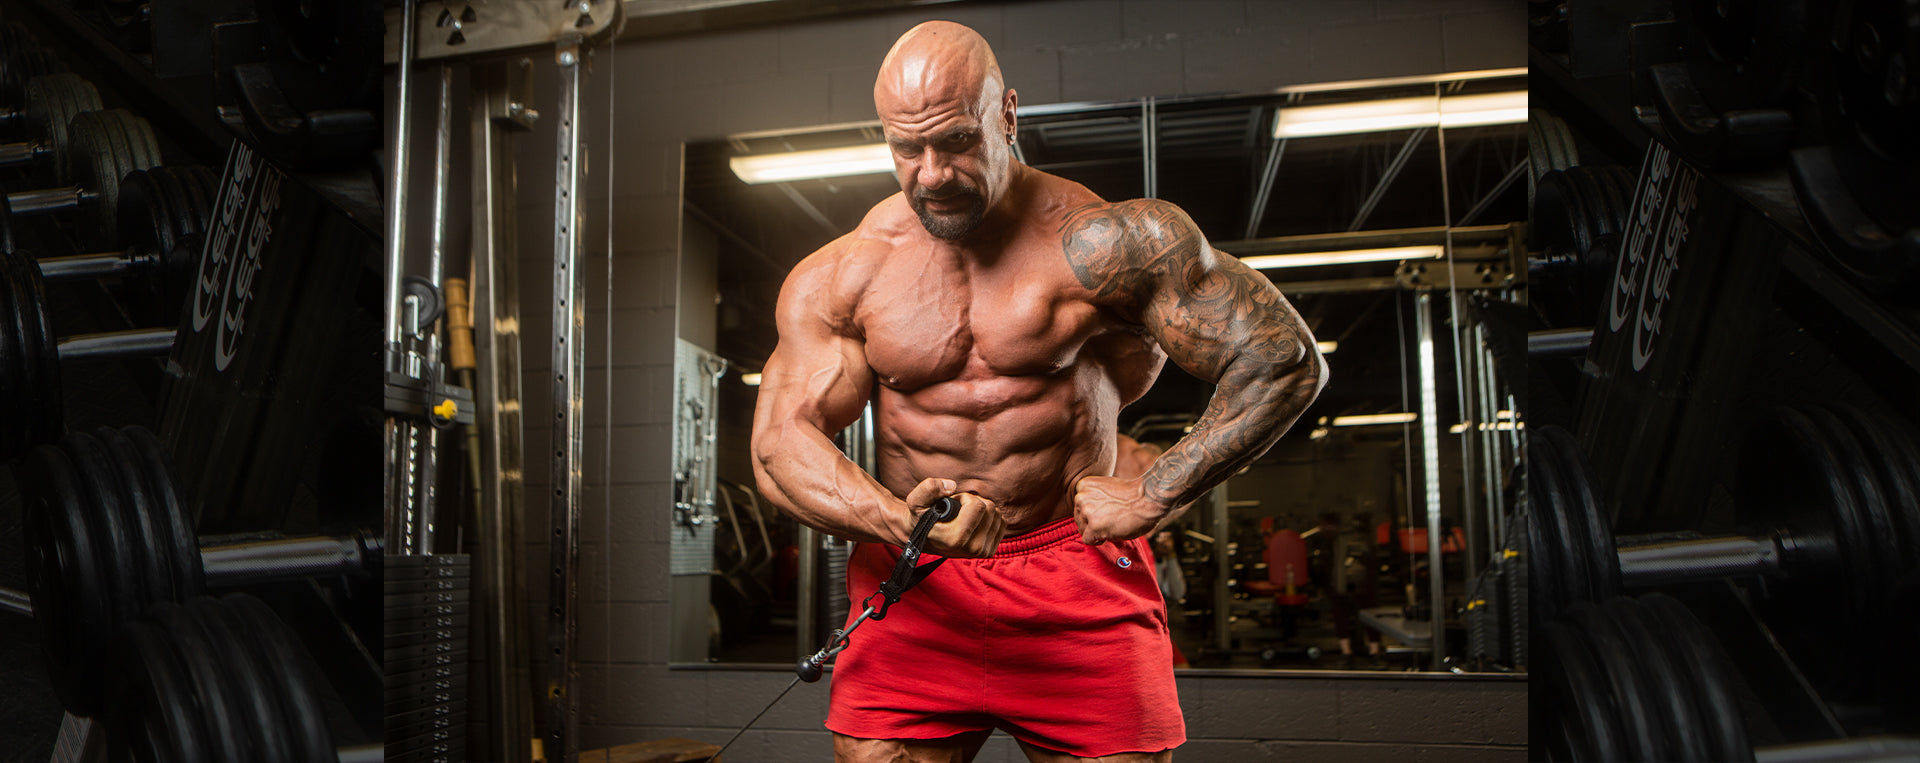 Bodybuilder Gary Turner shares some tips for beginners to navigate the gym.